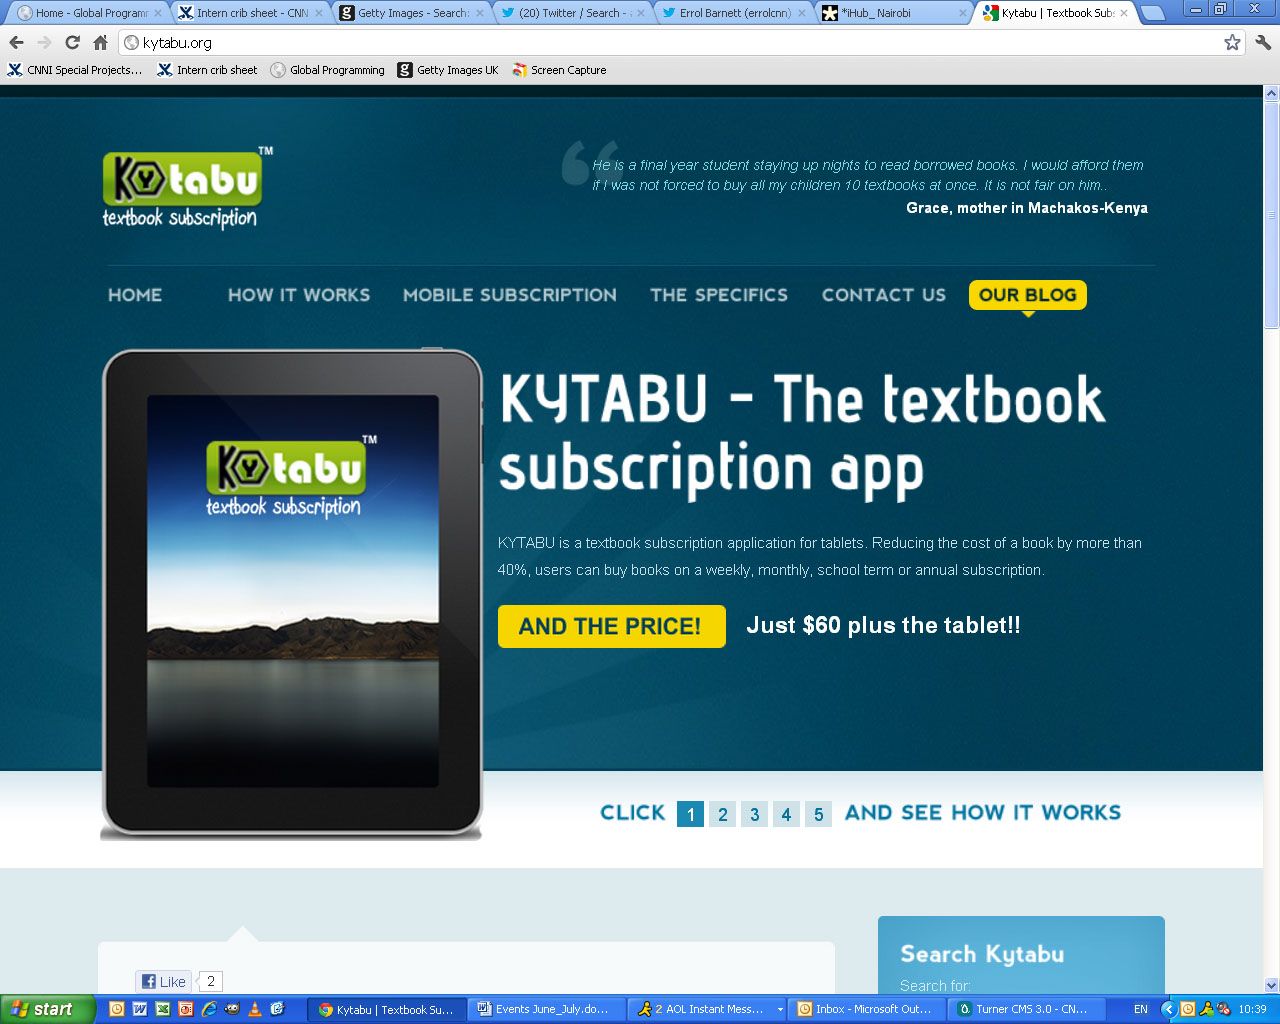 The Kytabu app was developed at iHub. It brings students digitized version of text books, making them cheaper and more accessible.